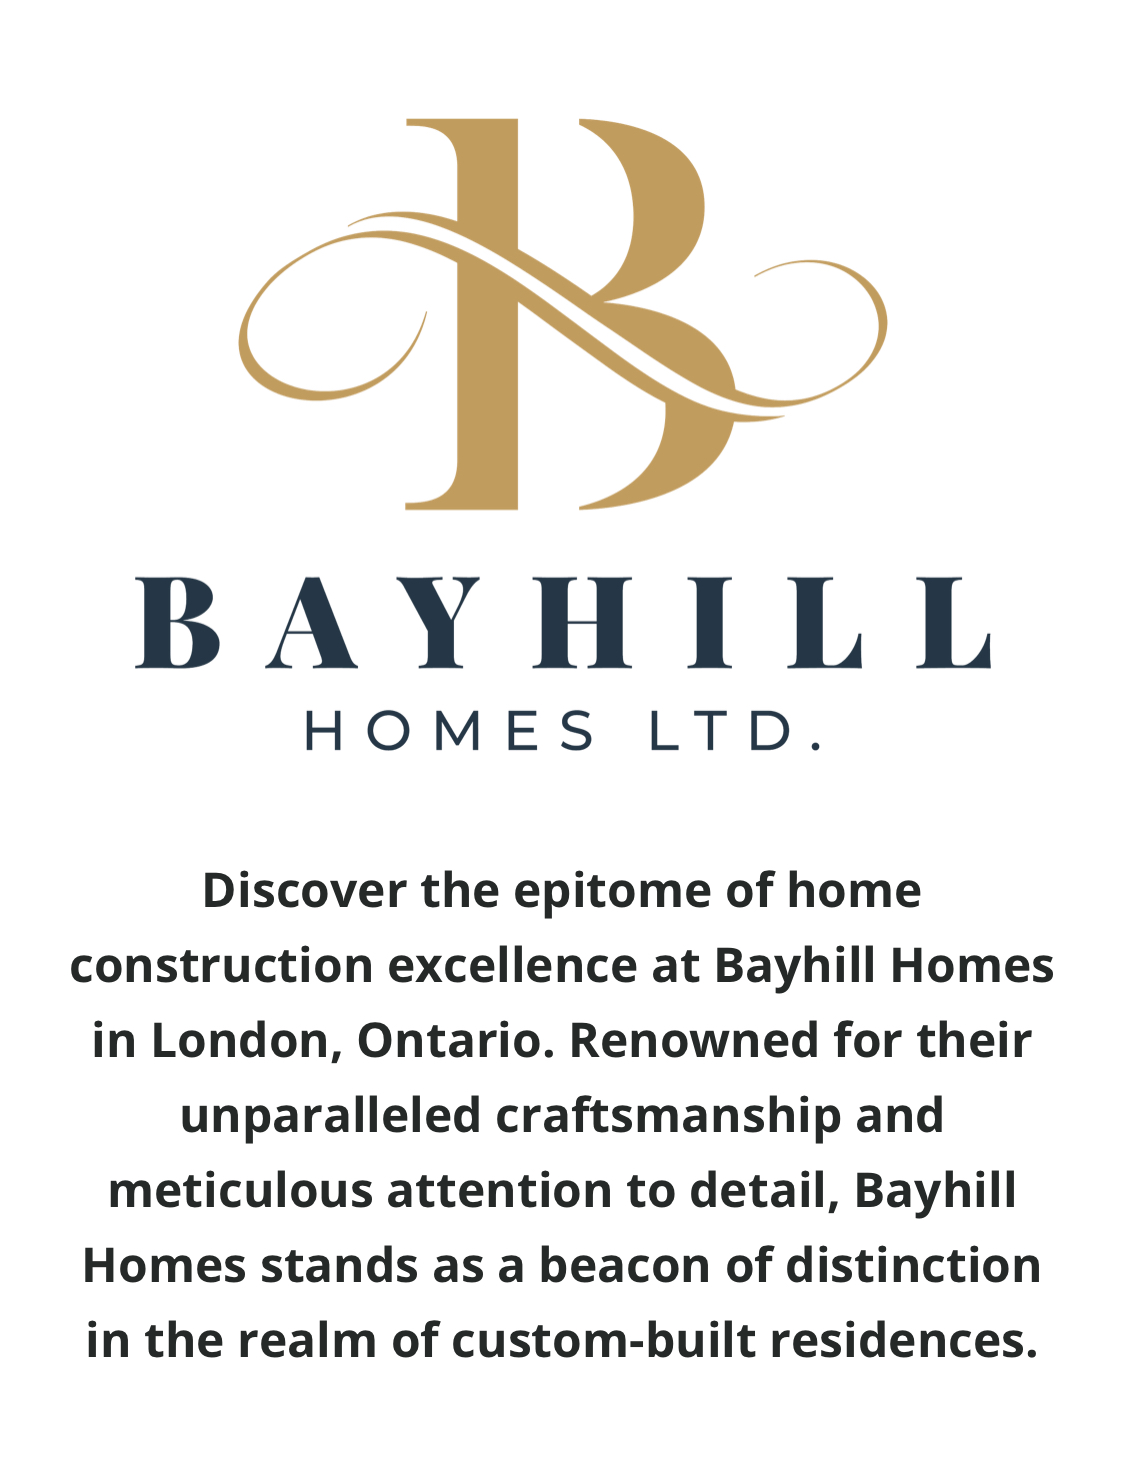 Proudly presenting Bayhill Homes